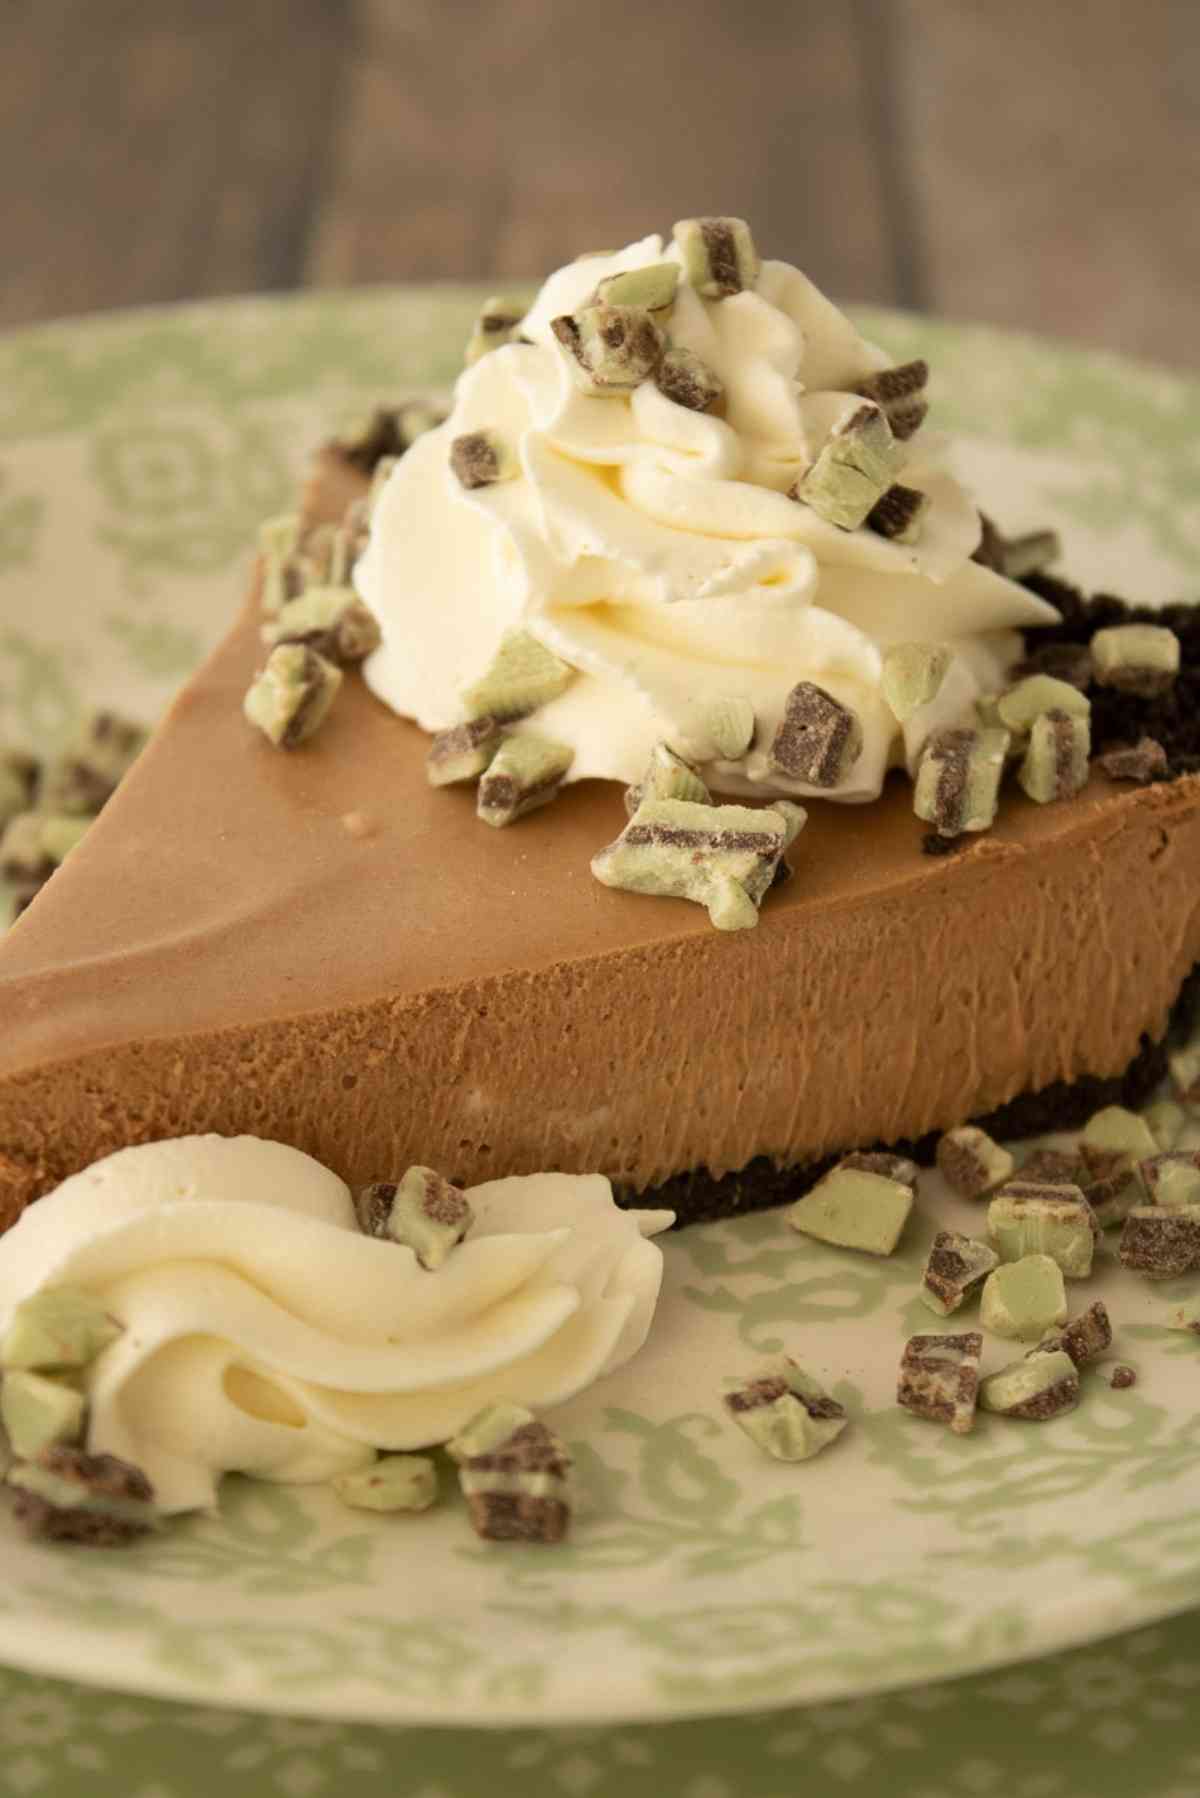 Slice of this chocolate mint grasshopper pie garnished with whipped cream and andes mints.